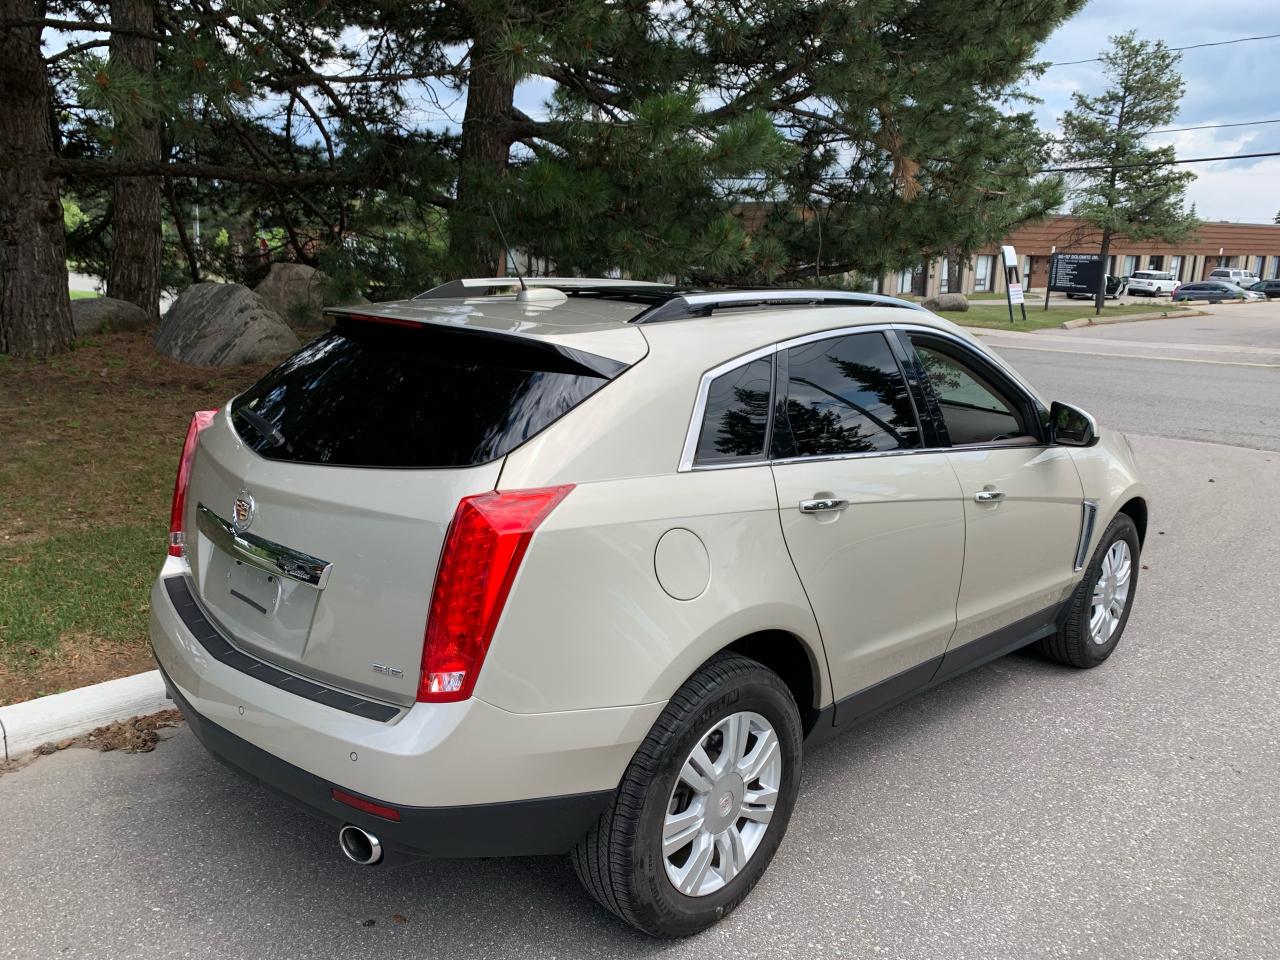 2015 Cadillac SRX LUXURY-ONLY 31,474 KMS!! 1 SENIOR OWNER! NO CLAIMS - Photo #2